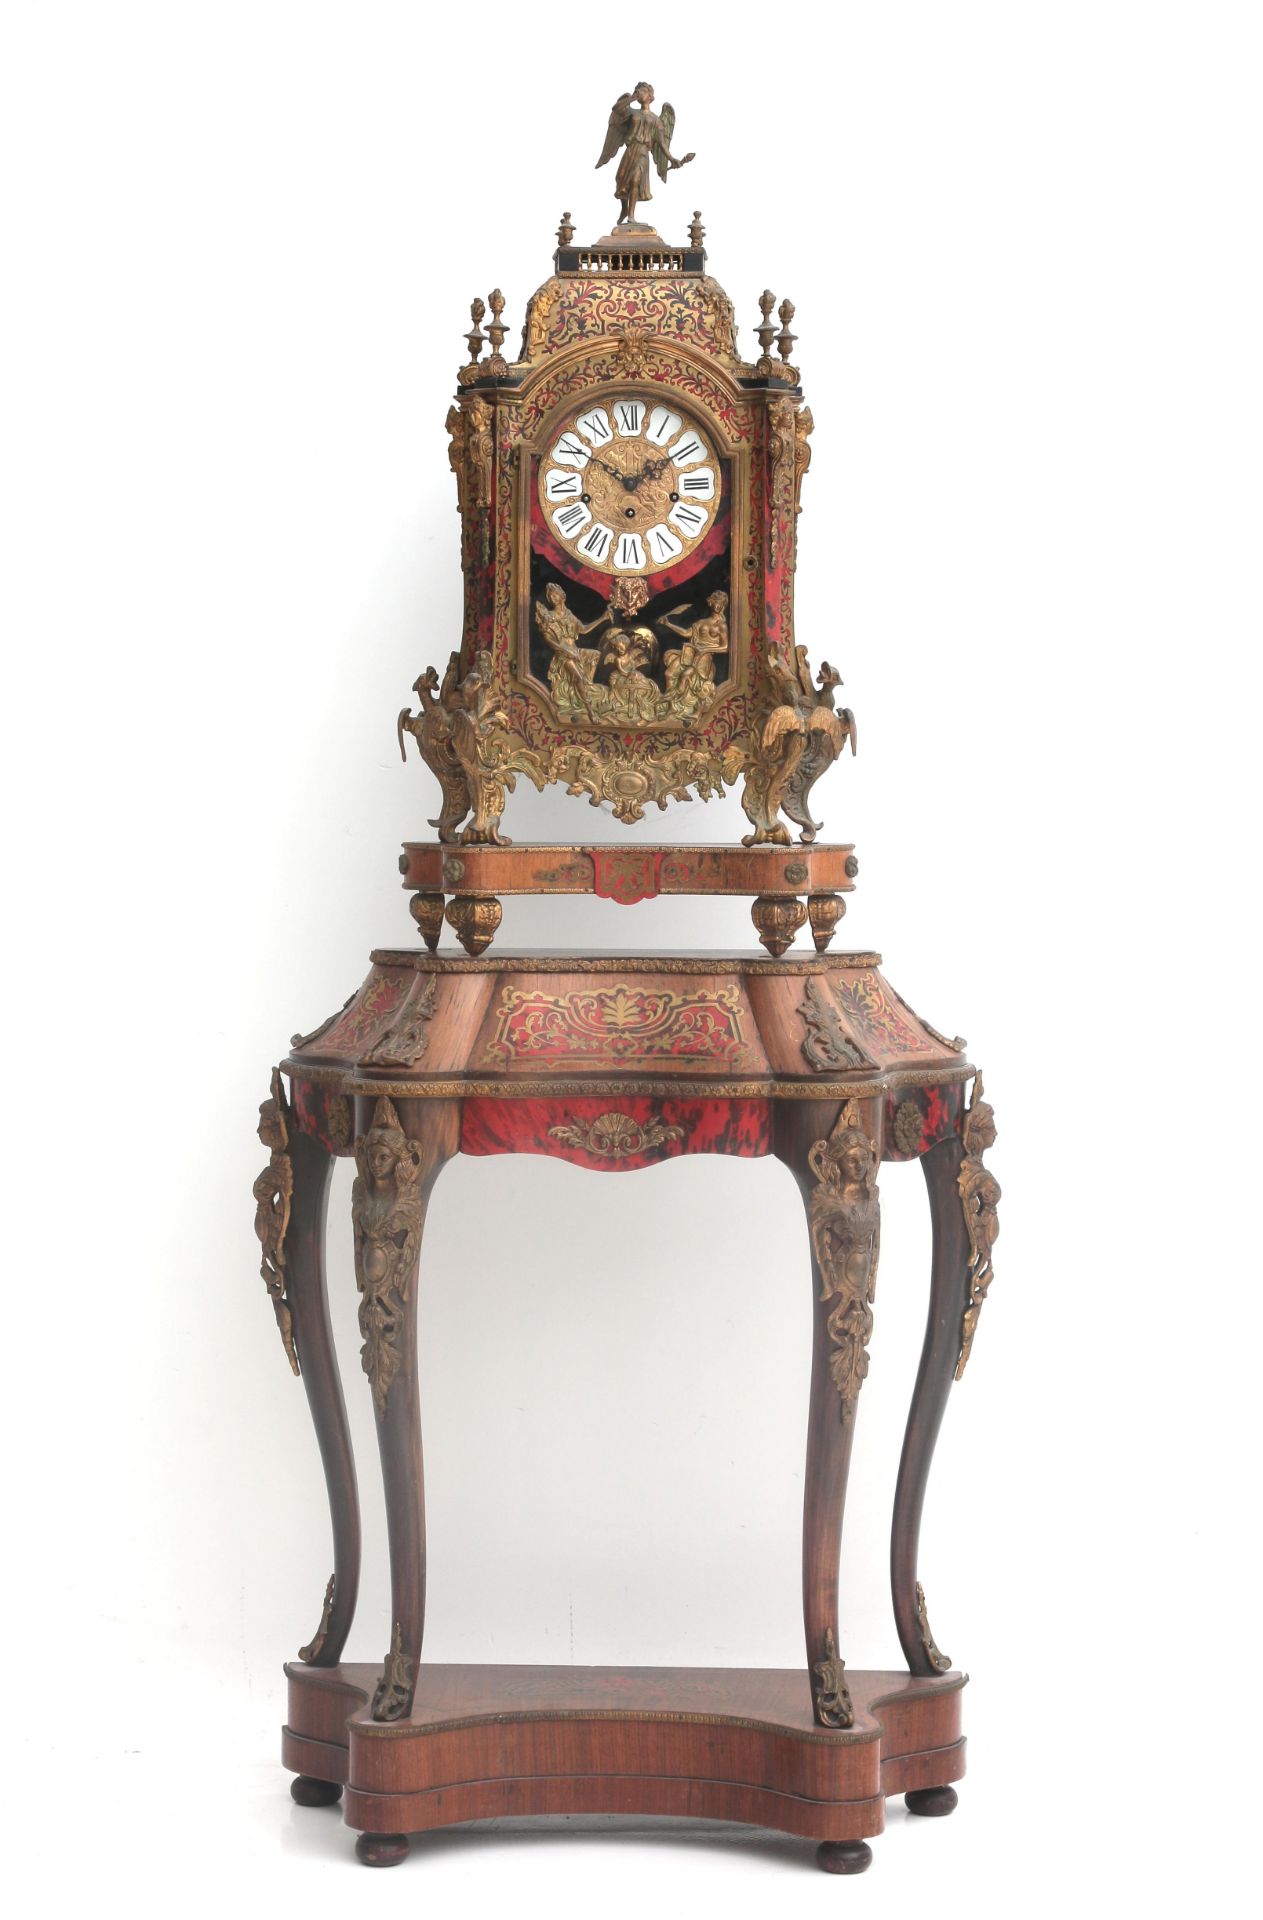 A large Boulle-style table clock with stand, France, 19th century. The case crowned with an angel (